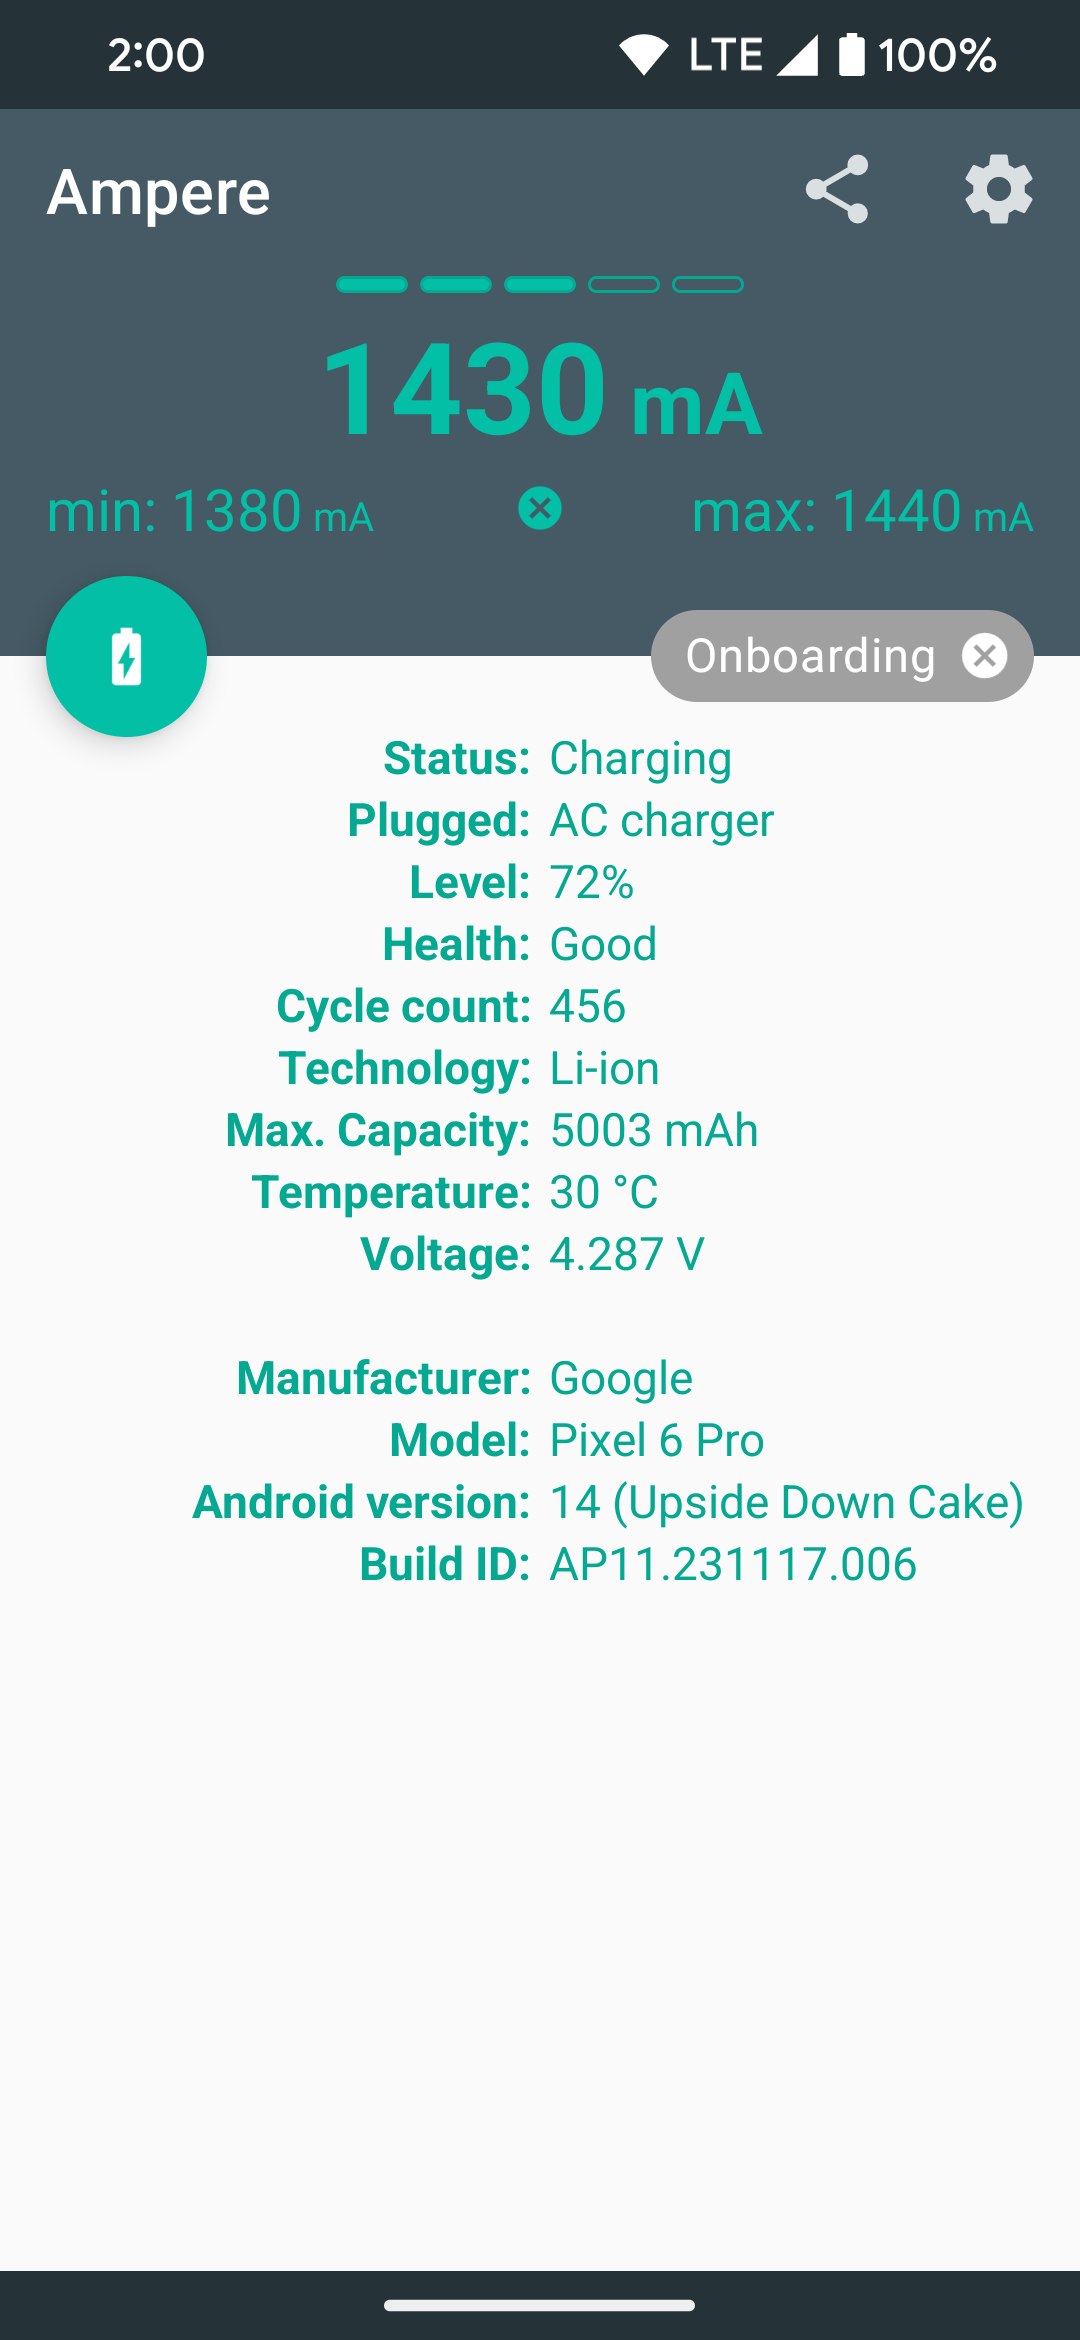 The Ampere app on Android is now showing the initial charging speed results